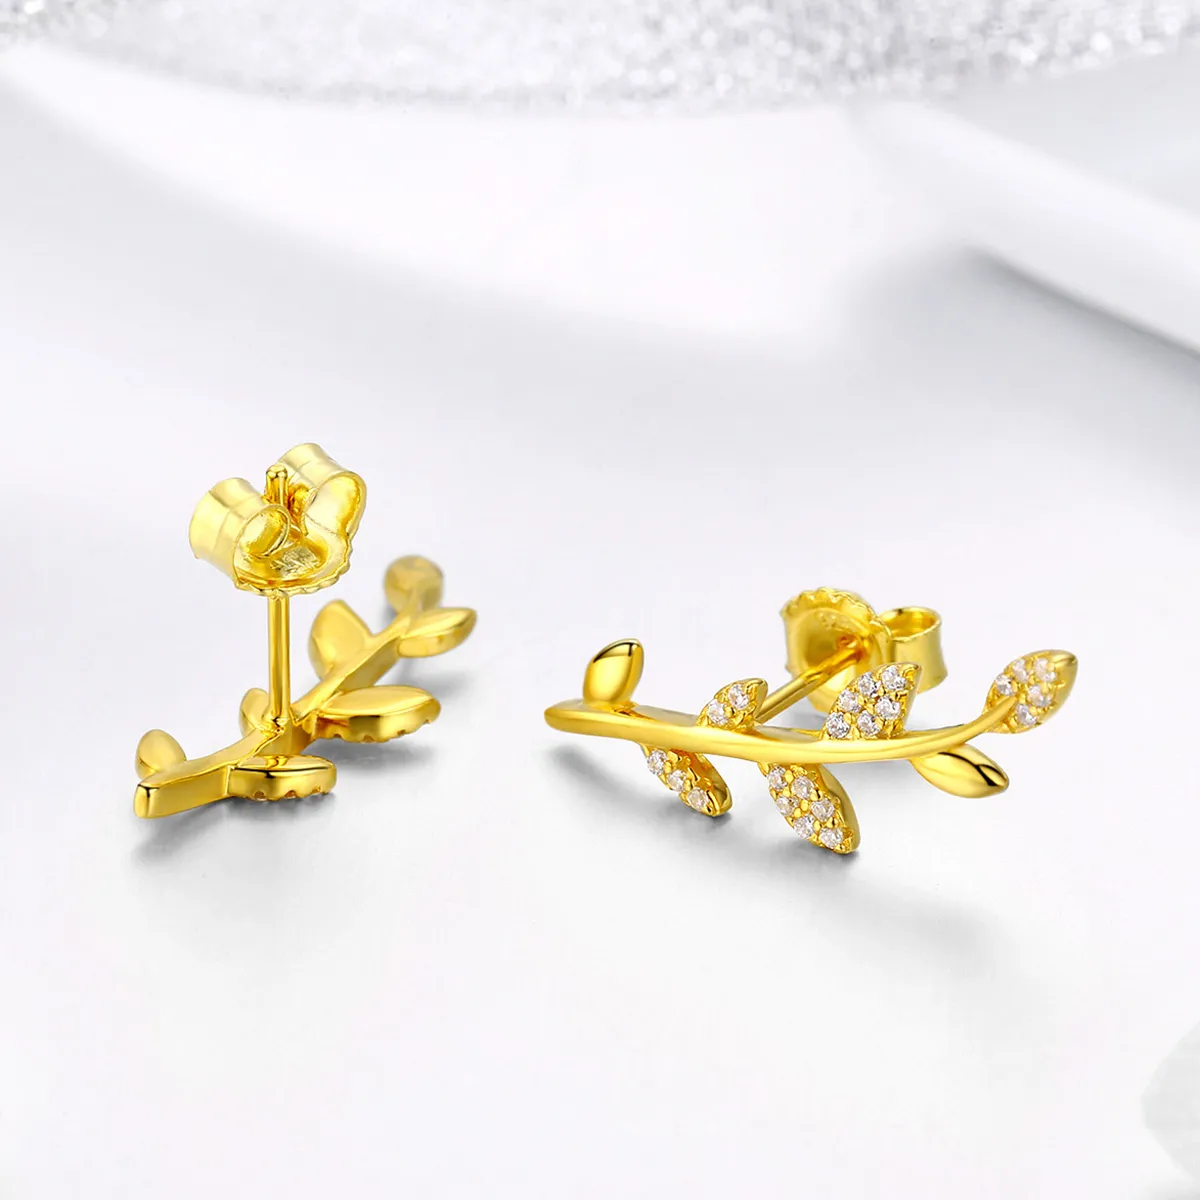 Pandora Style Gold-Plated Branch of Leaves Stud Earrings - SCE556